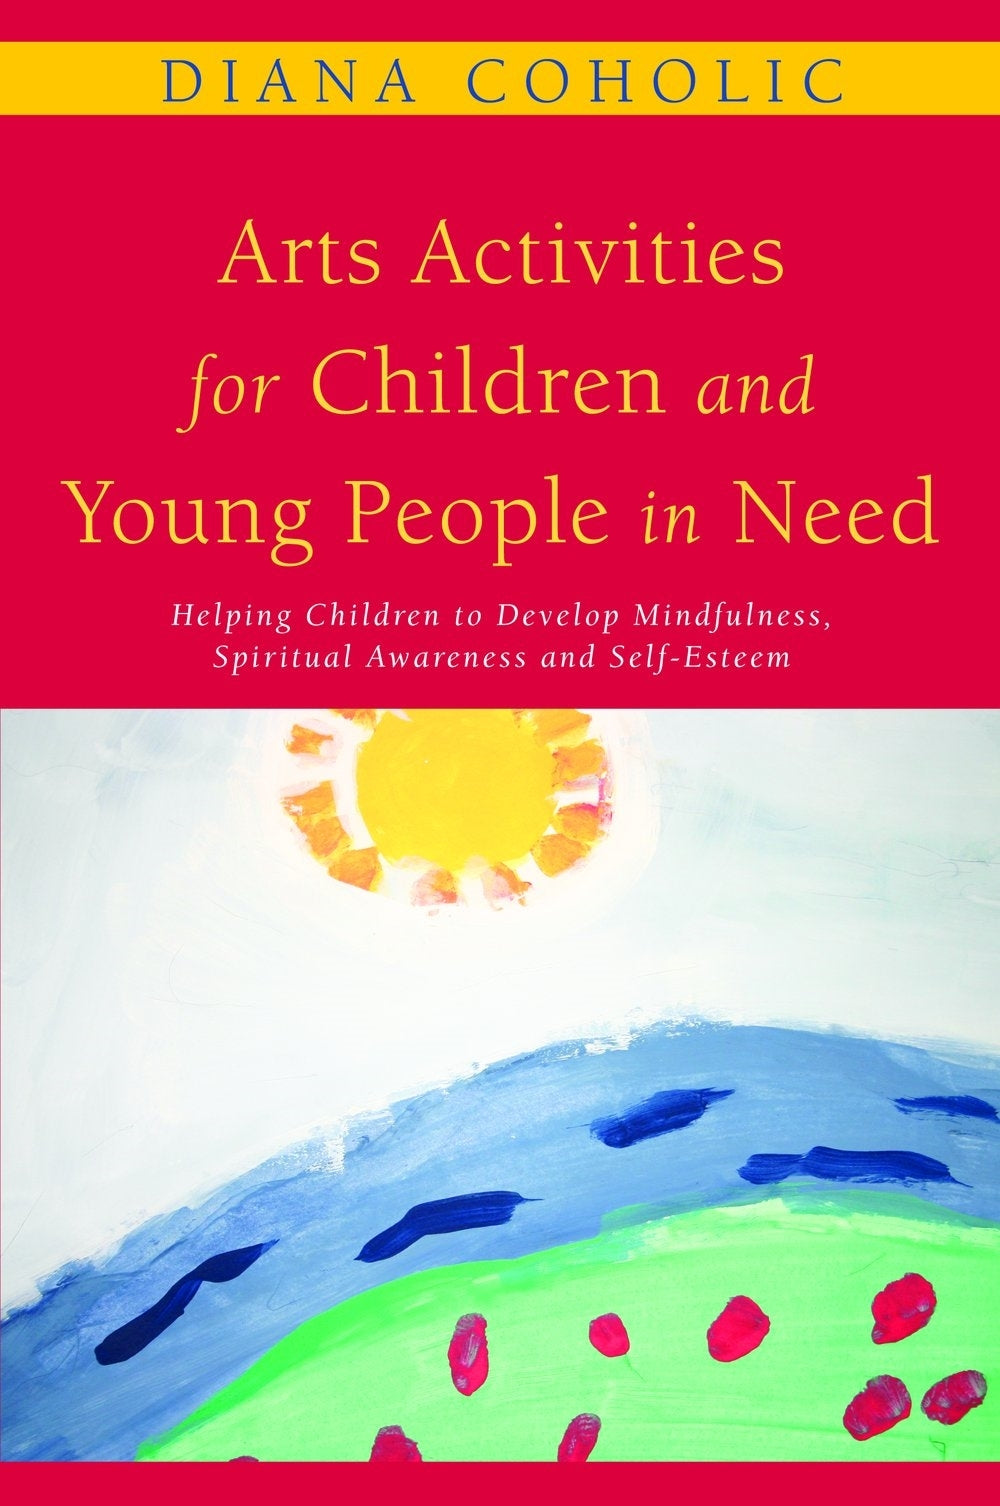 Arts Activities for Children and Young People in Need by Diana Coholic